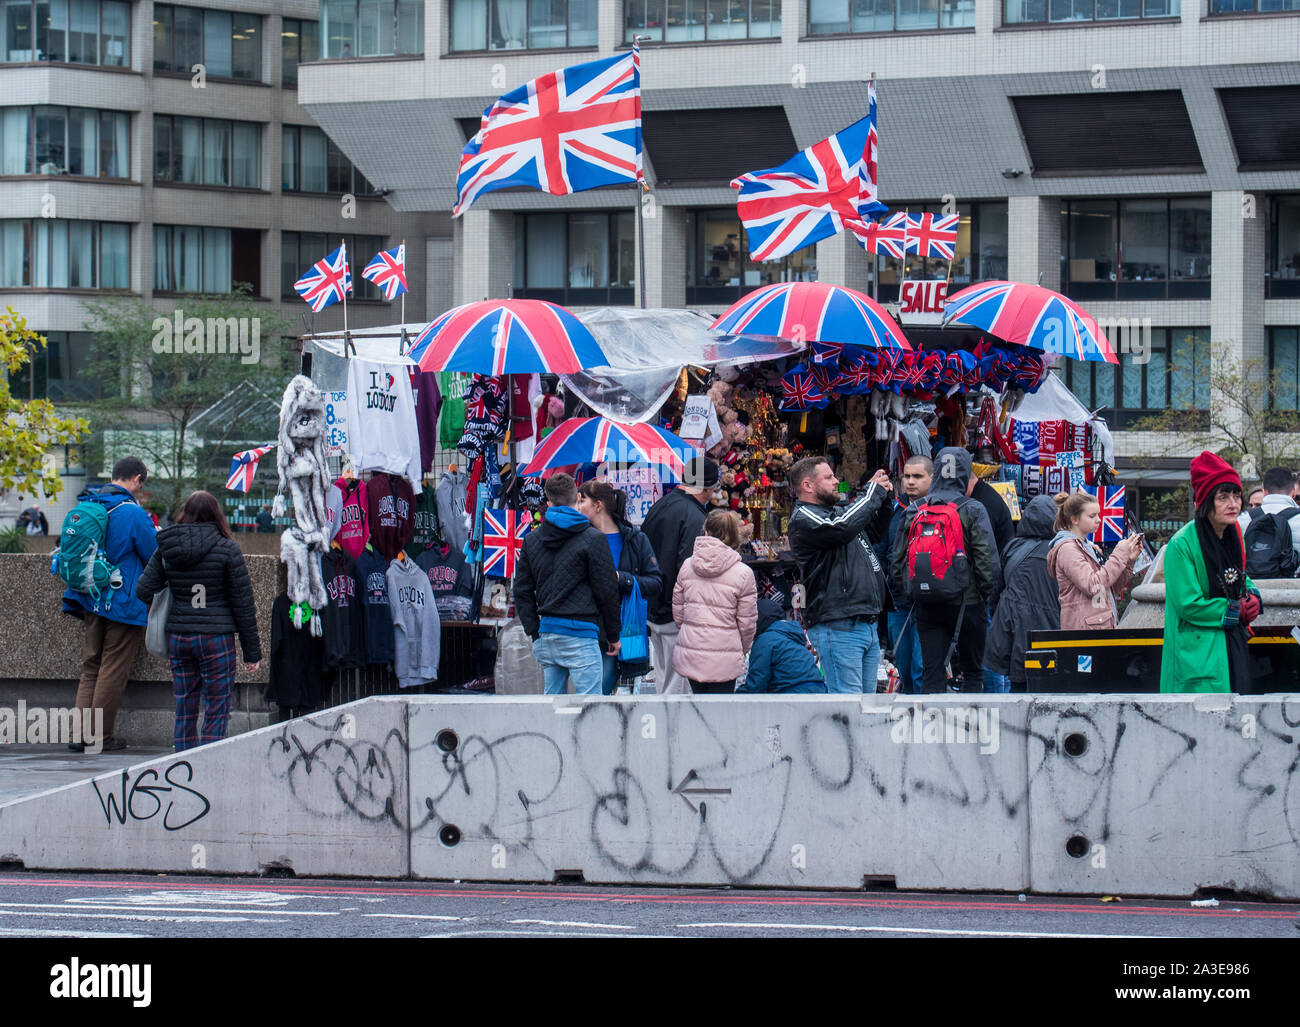 London, UK. 7th Oct 2019. UK Weather:A stall outside St Thomas' Hospital sells union flag umbrella's on a dull and wet start to the week. Celia McMahon/Alamy Live News. Credit: Celia McMahon/Alamy Live News Stock Photo